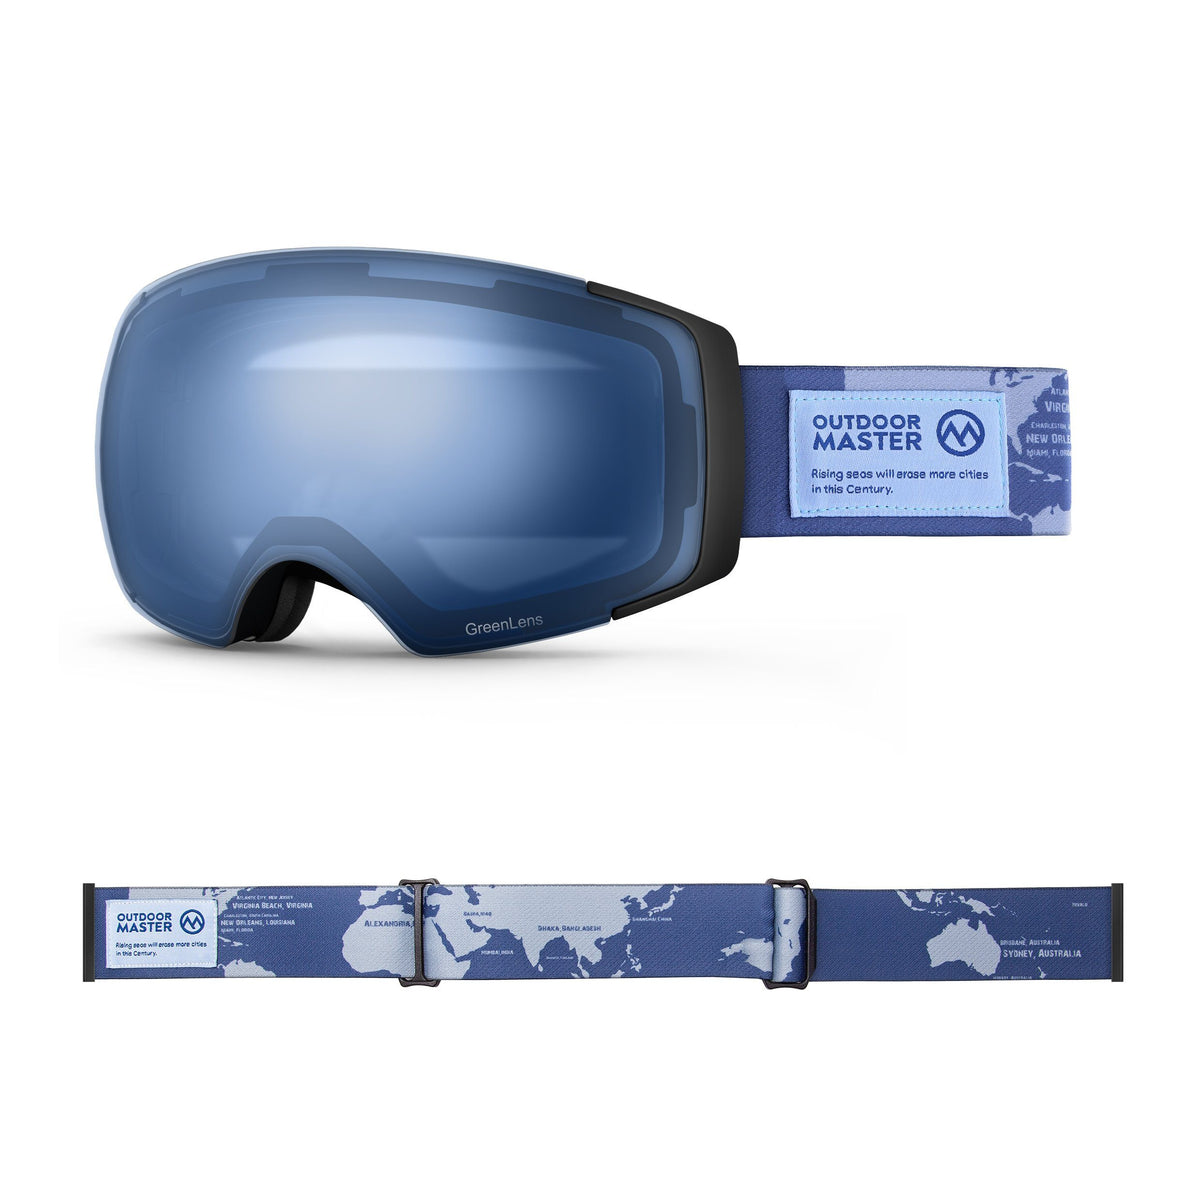 Eco-friendly Ski Goggles Pro Series - The Disappearing Places/Classic BambooStraps Limited Edition OutdoorMaster GreenLens VLT 60% TAC Blue Polarized The Disappearing Places